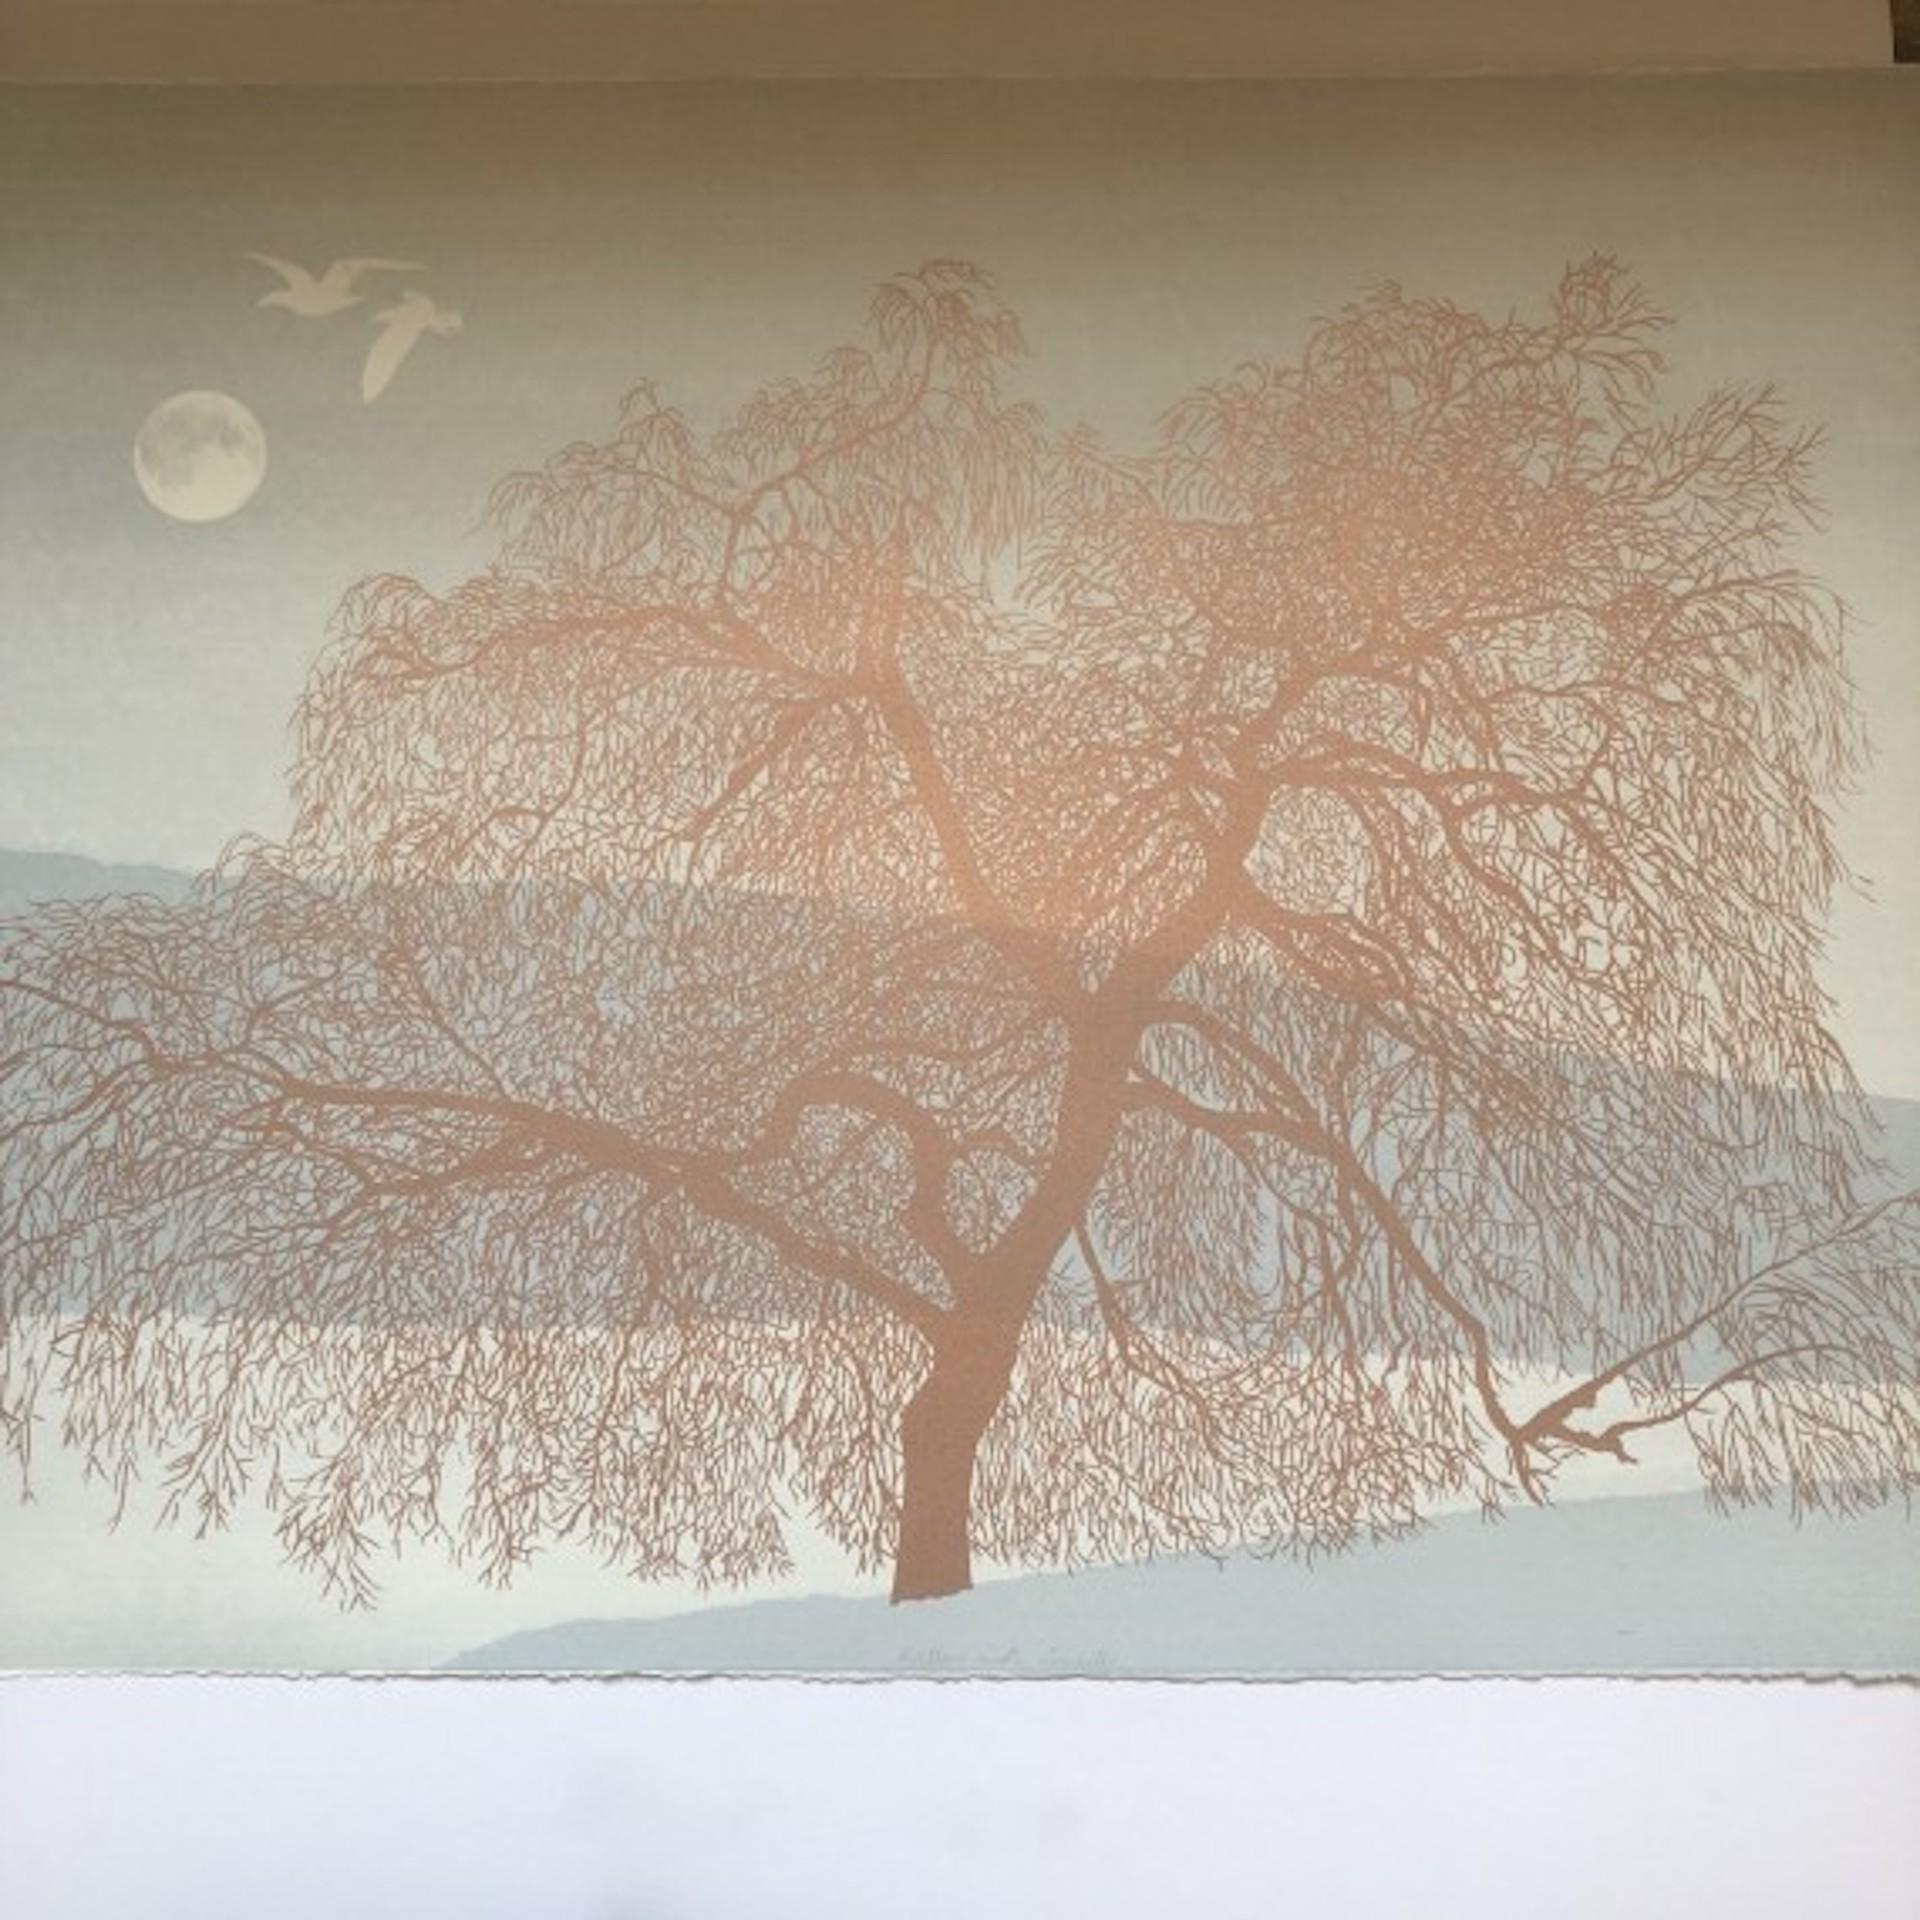 Anna Harley, Willow with Seagulls, Limited Edition Print, Tree Art For Sale 1